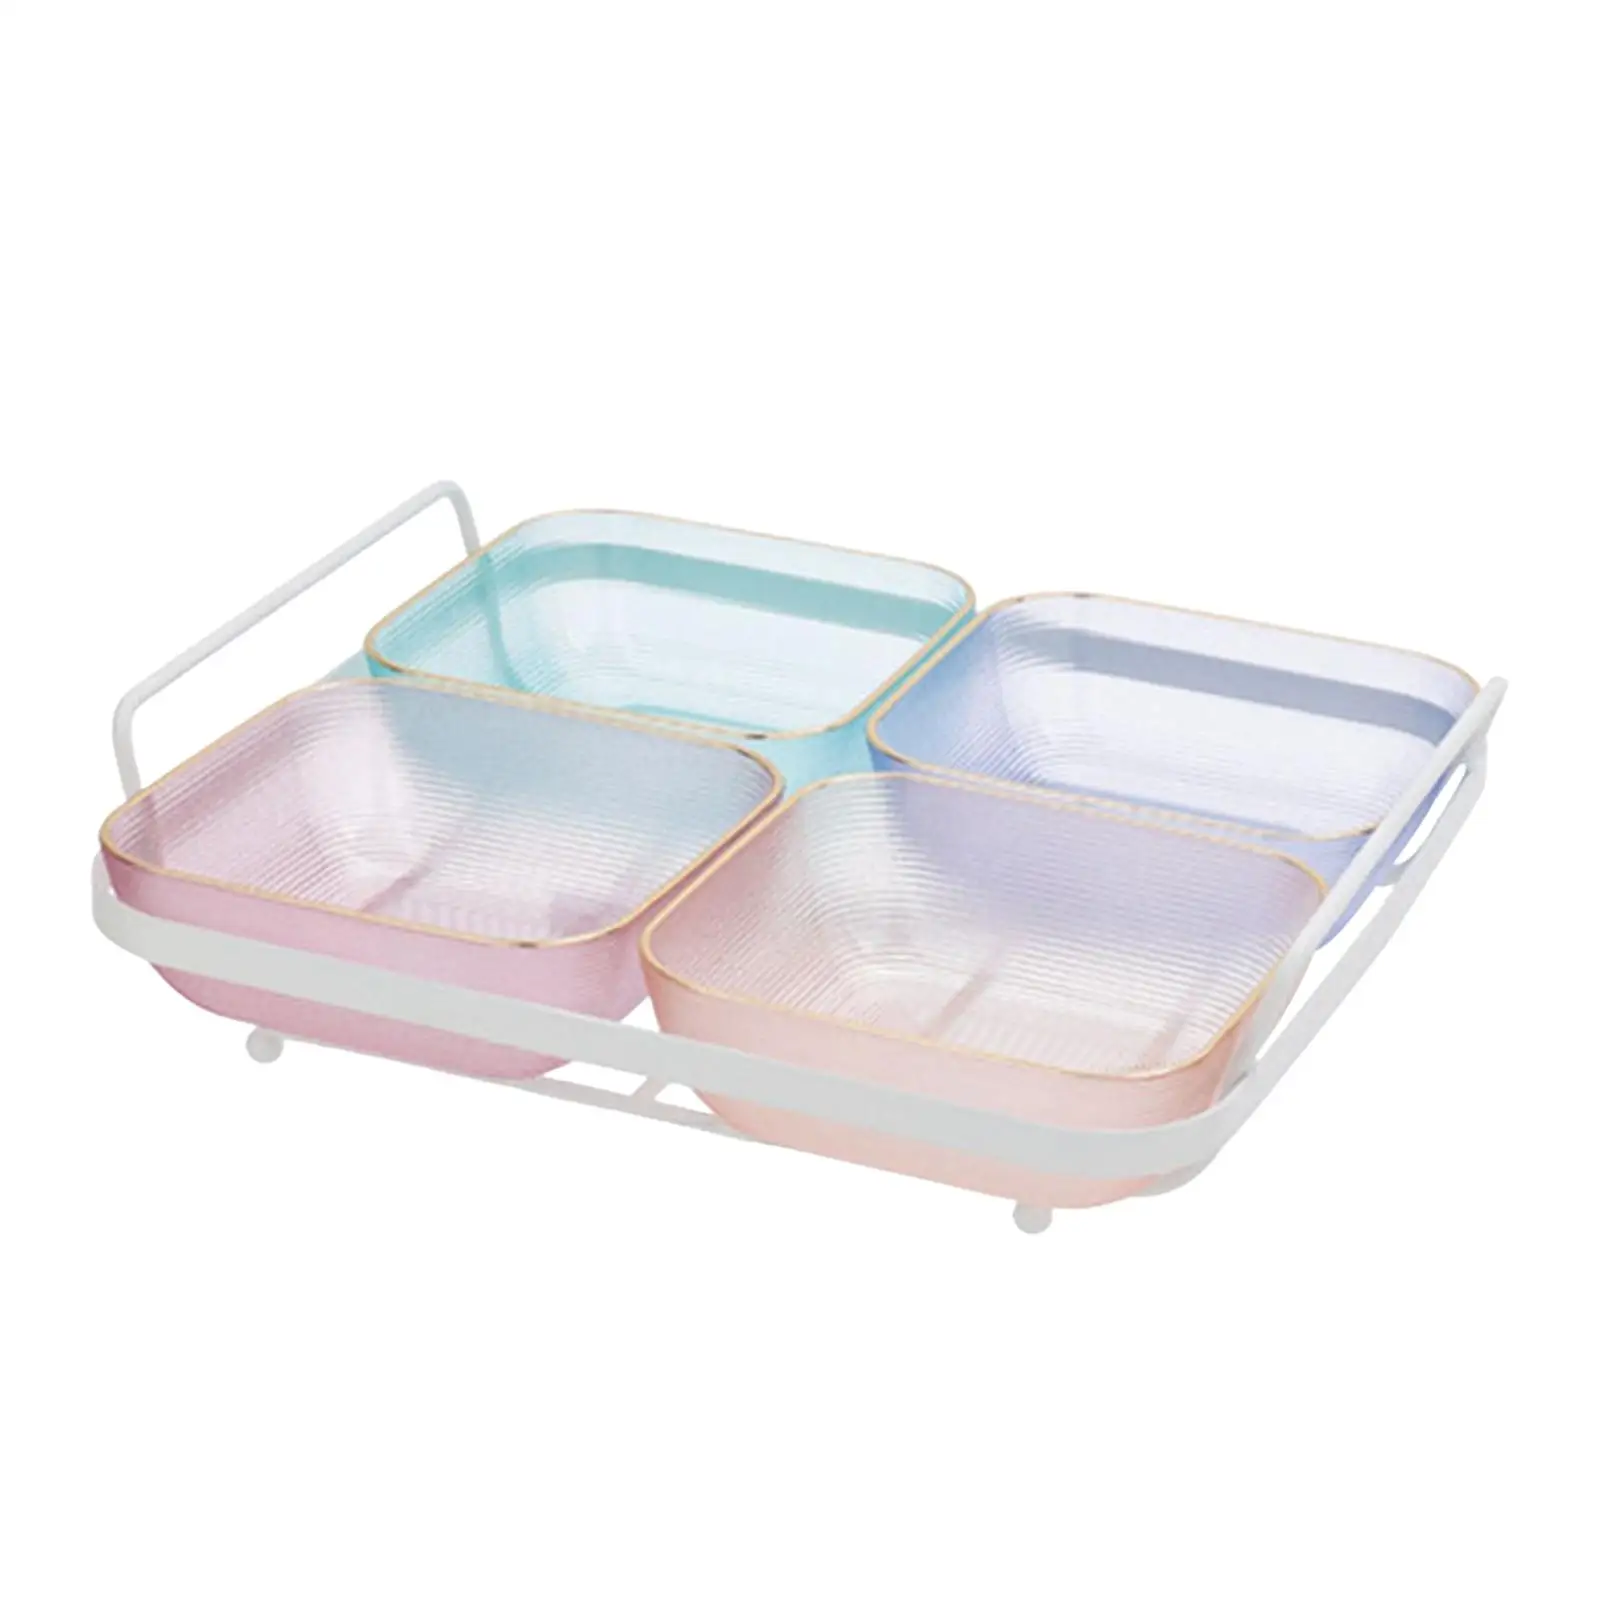 Candy Serving Tray Condiment Container Appetizer Snack Tray Dish Plate Dessert Plate Platter for Kitchen Hotel Home Party